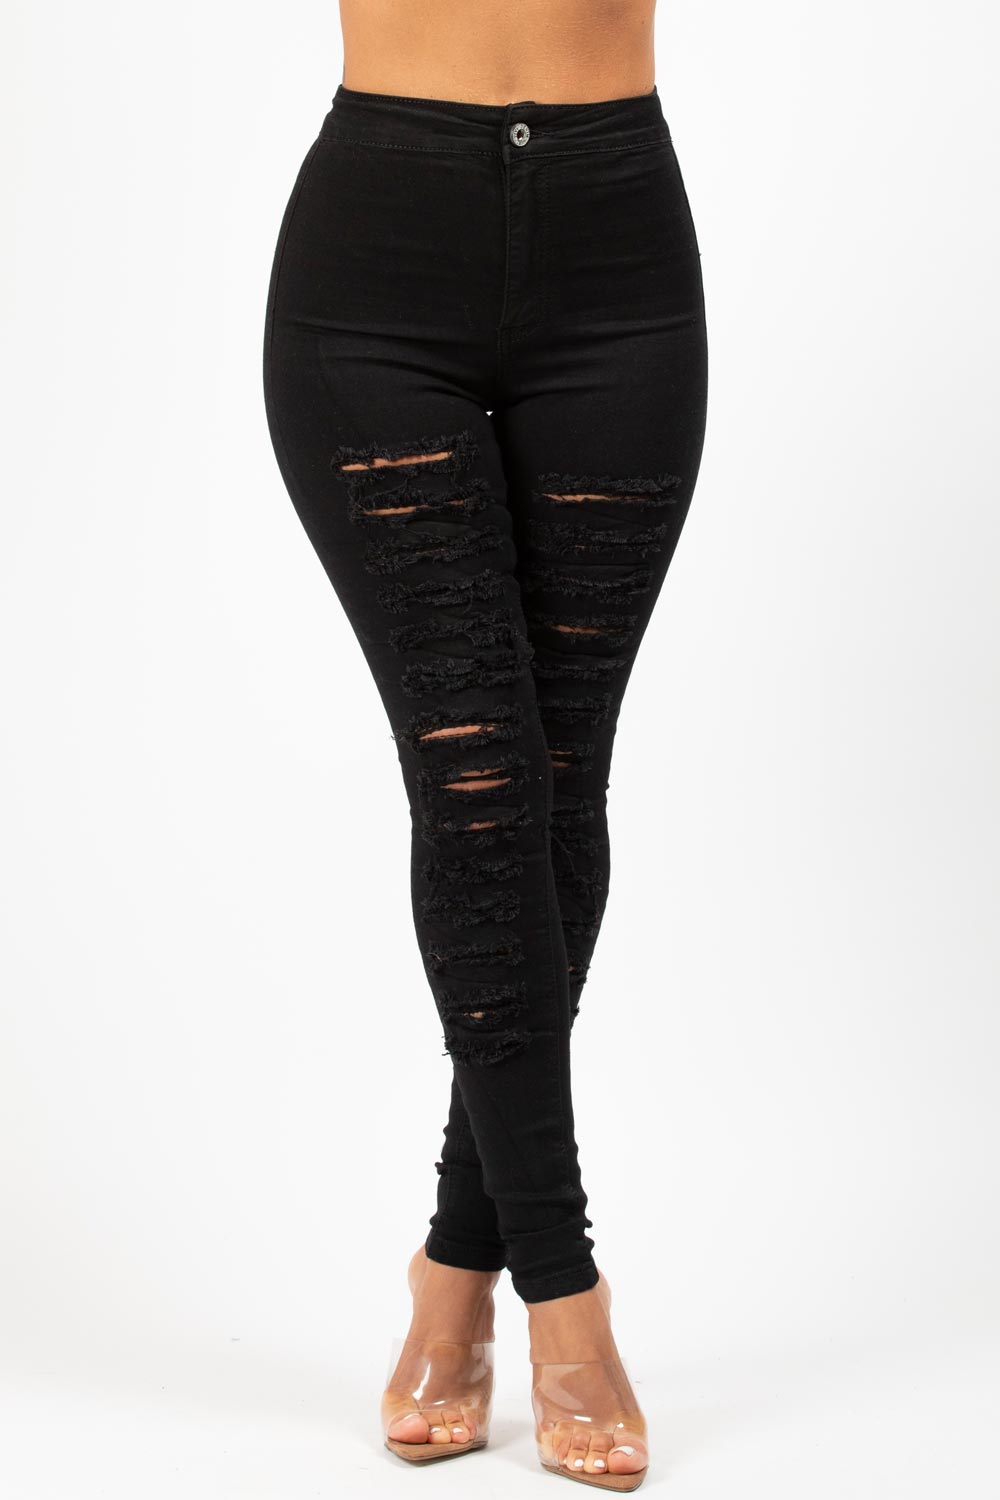 black ripped skinny jeans womens high waisted